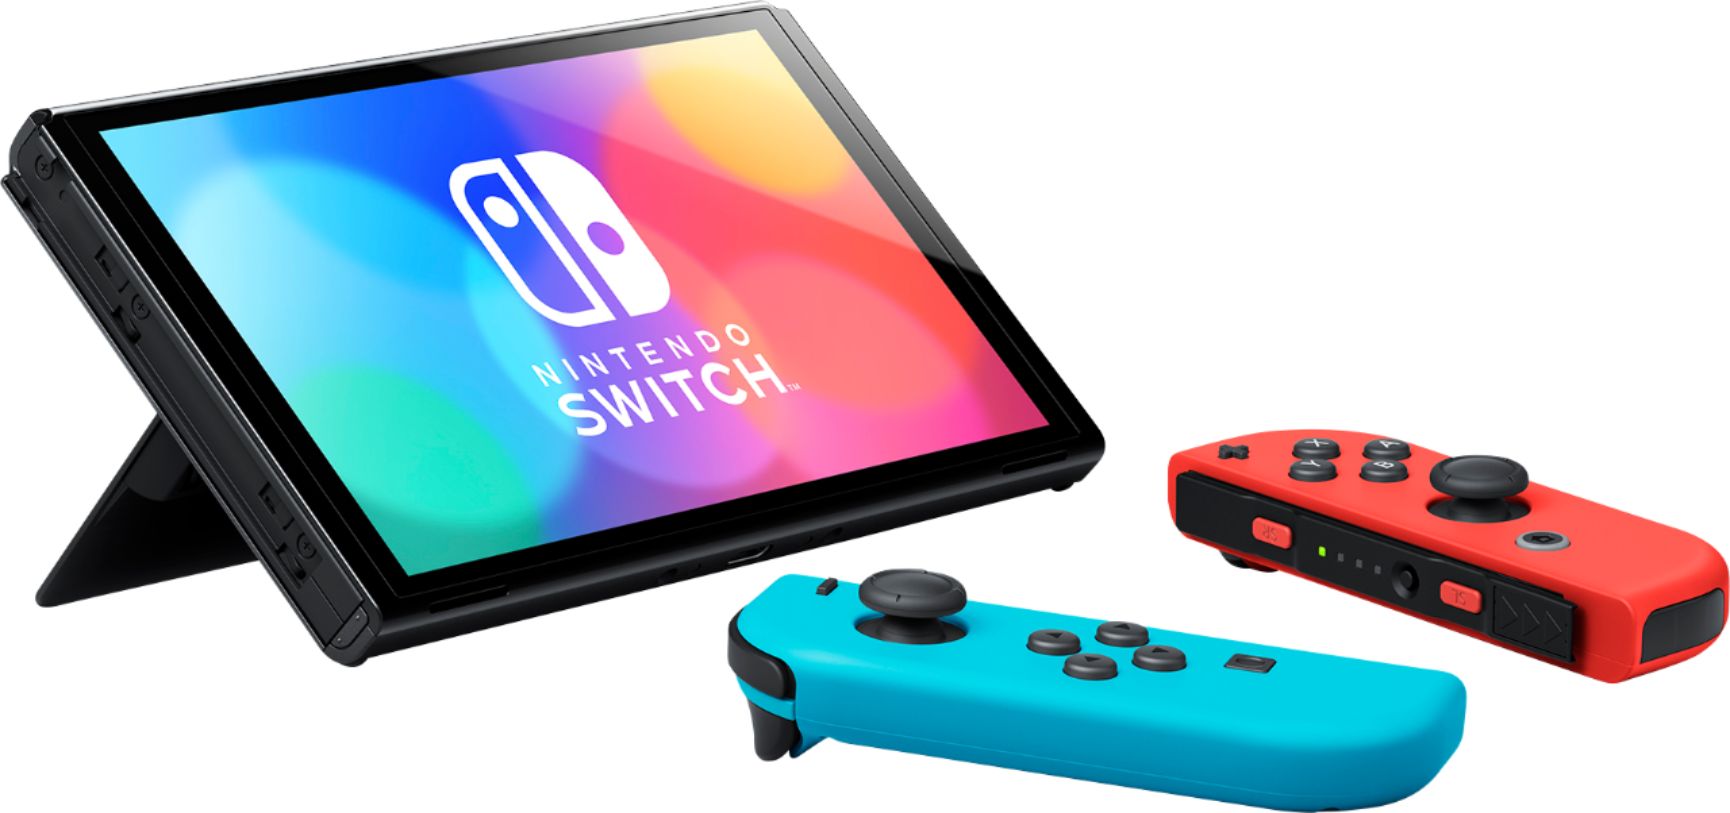 2022 New Nintendo Switch OLED Model Neon Red Blue with Super Mario Maker 2 and Mytrix Full Body Skin Sticker for NS OLED Console, Dock and Joycons - Sakura Pink